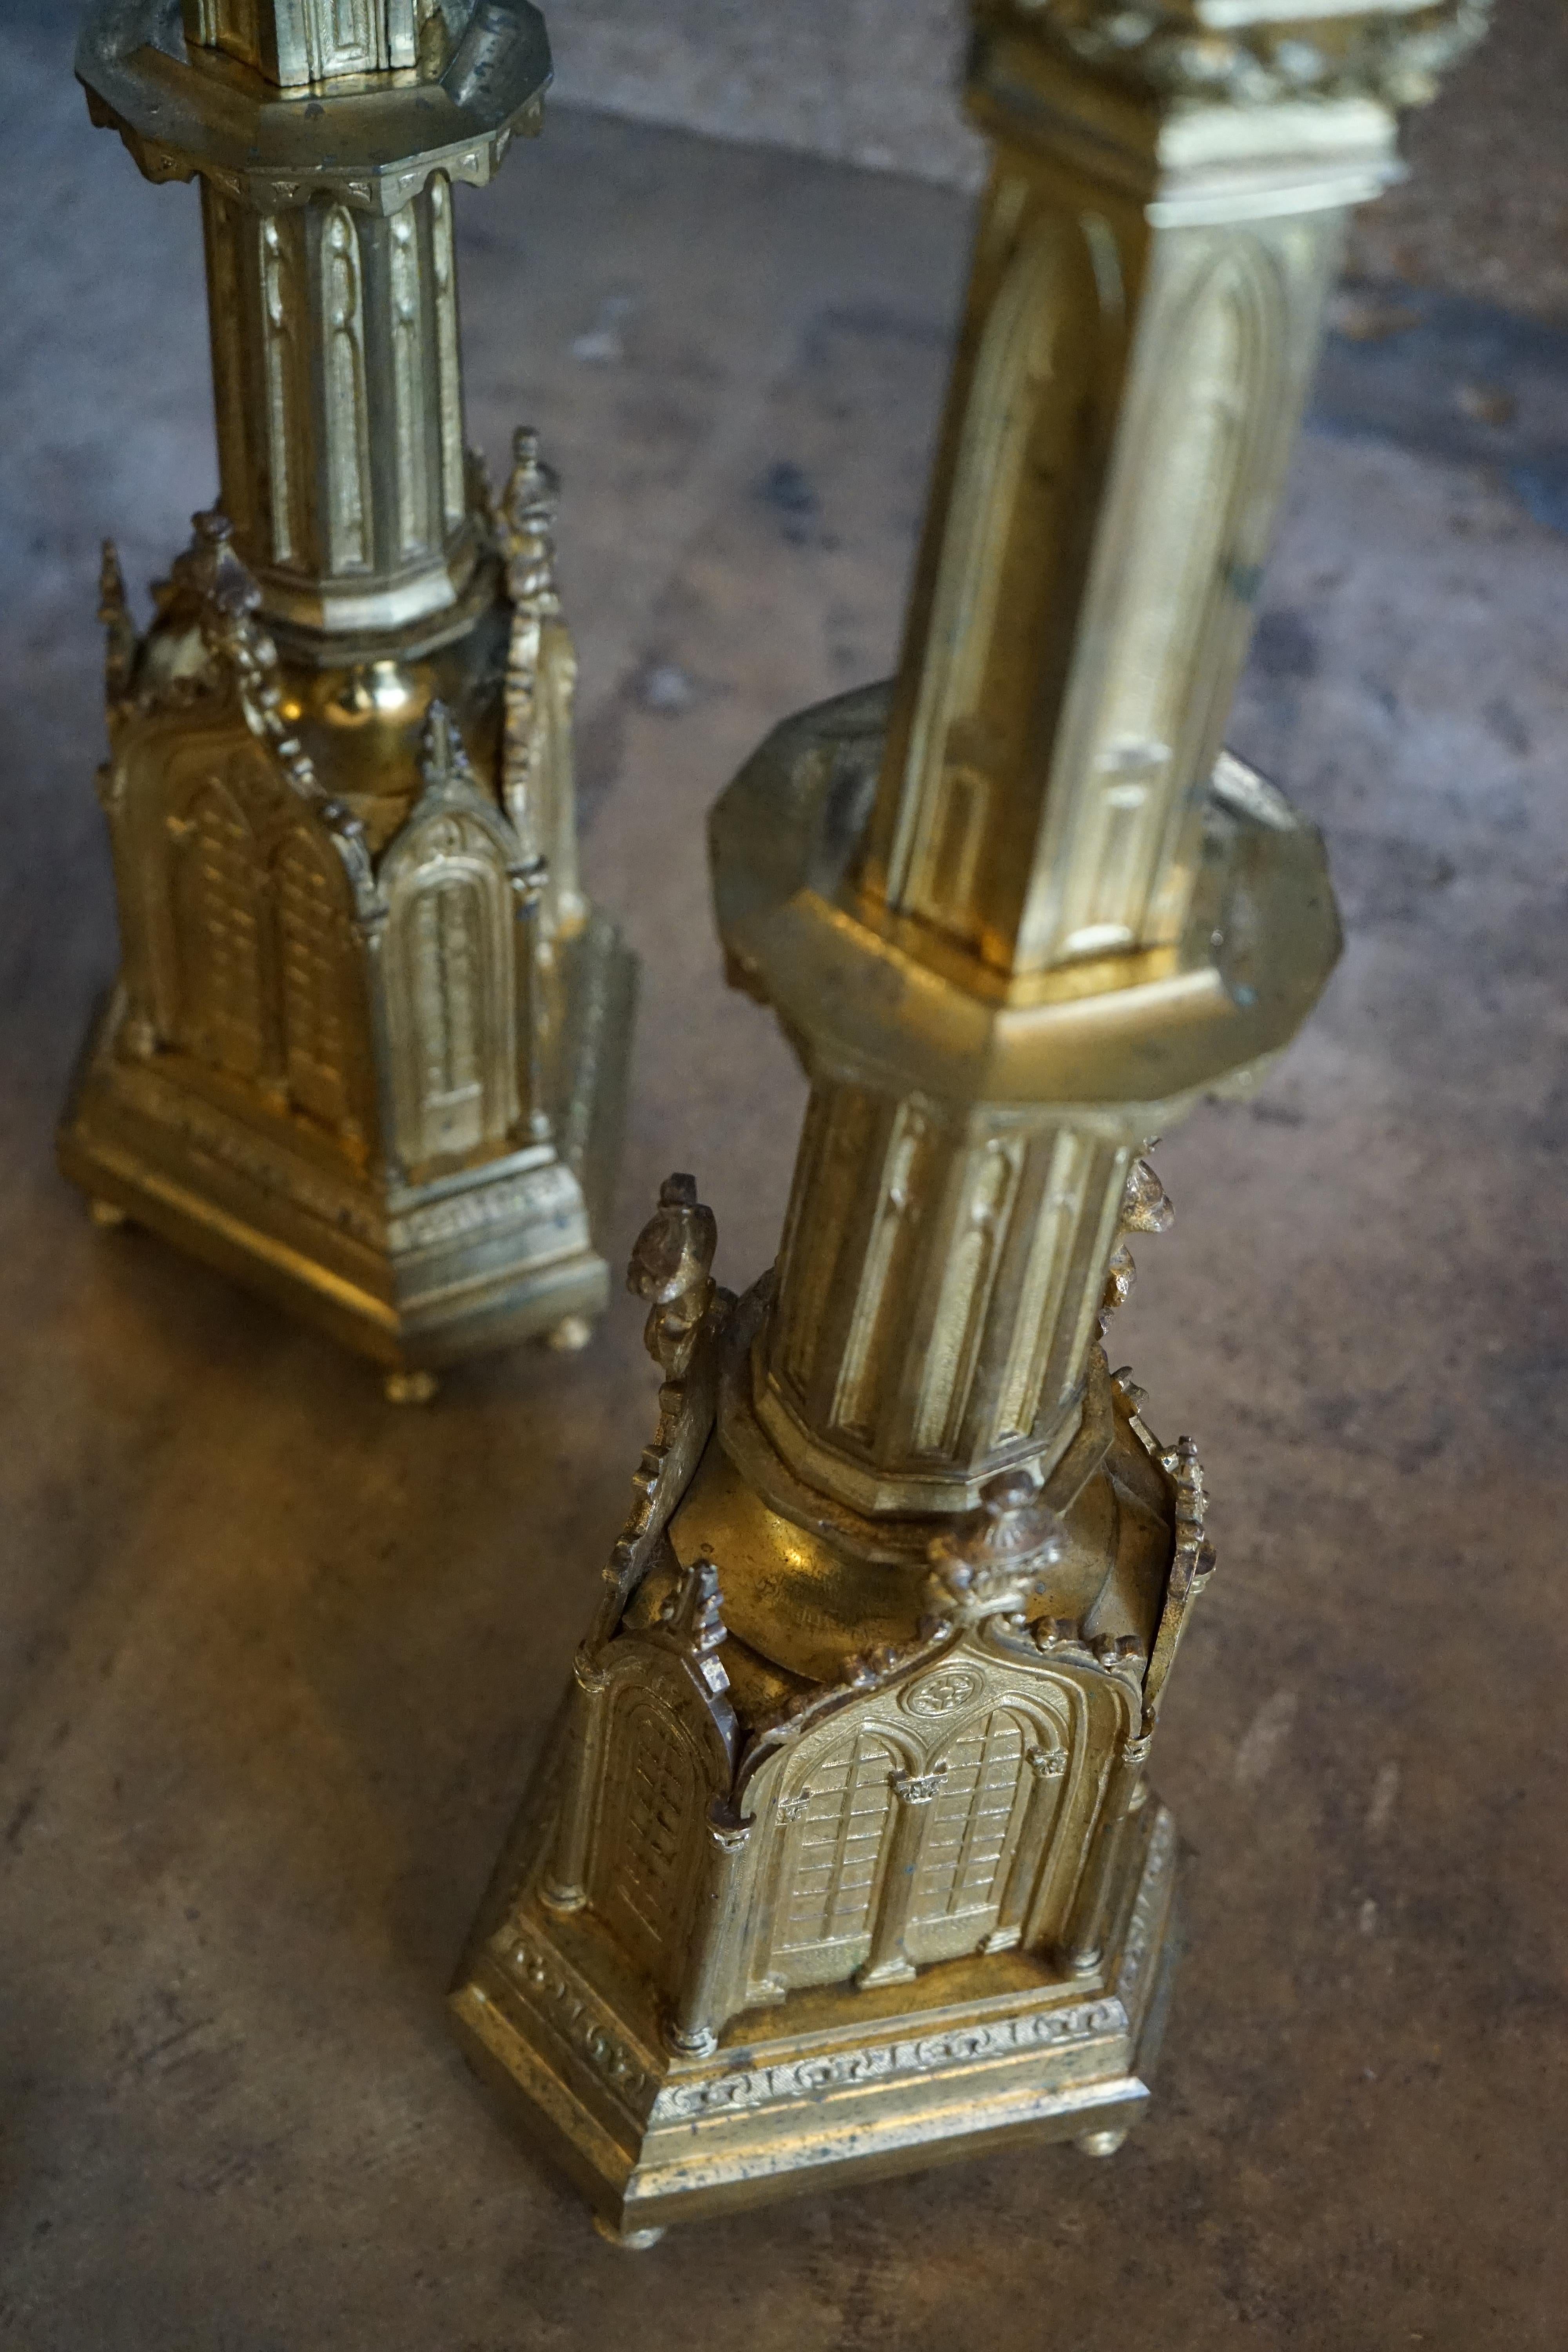 This pair of gold-plated candlesticks are made of brass and originate from France, circa 1880.

Measurements: 34'' H x 7.5'' D x 8.5'' W.